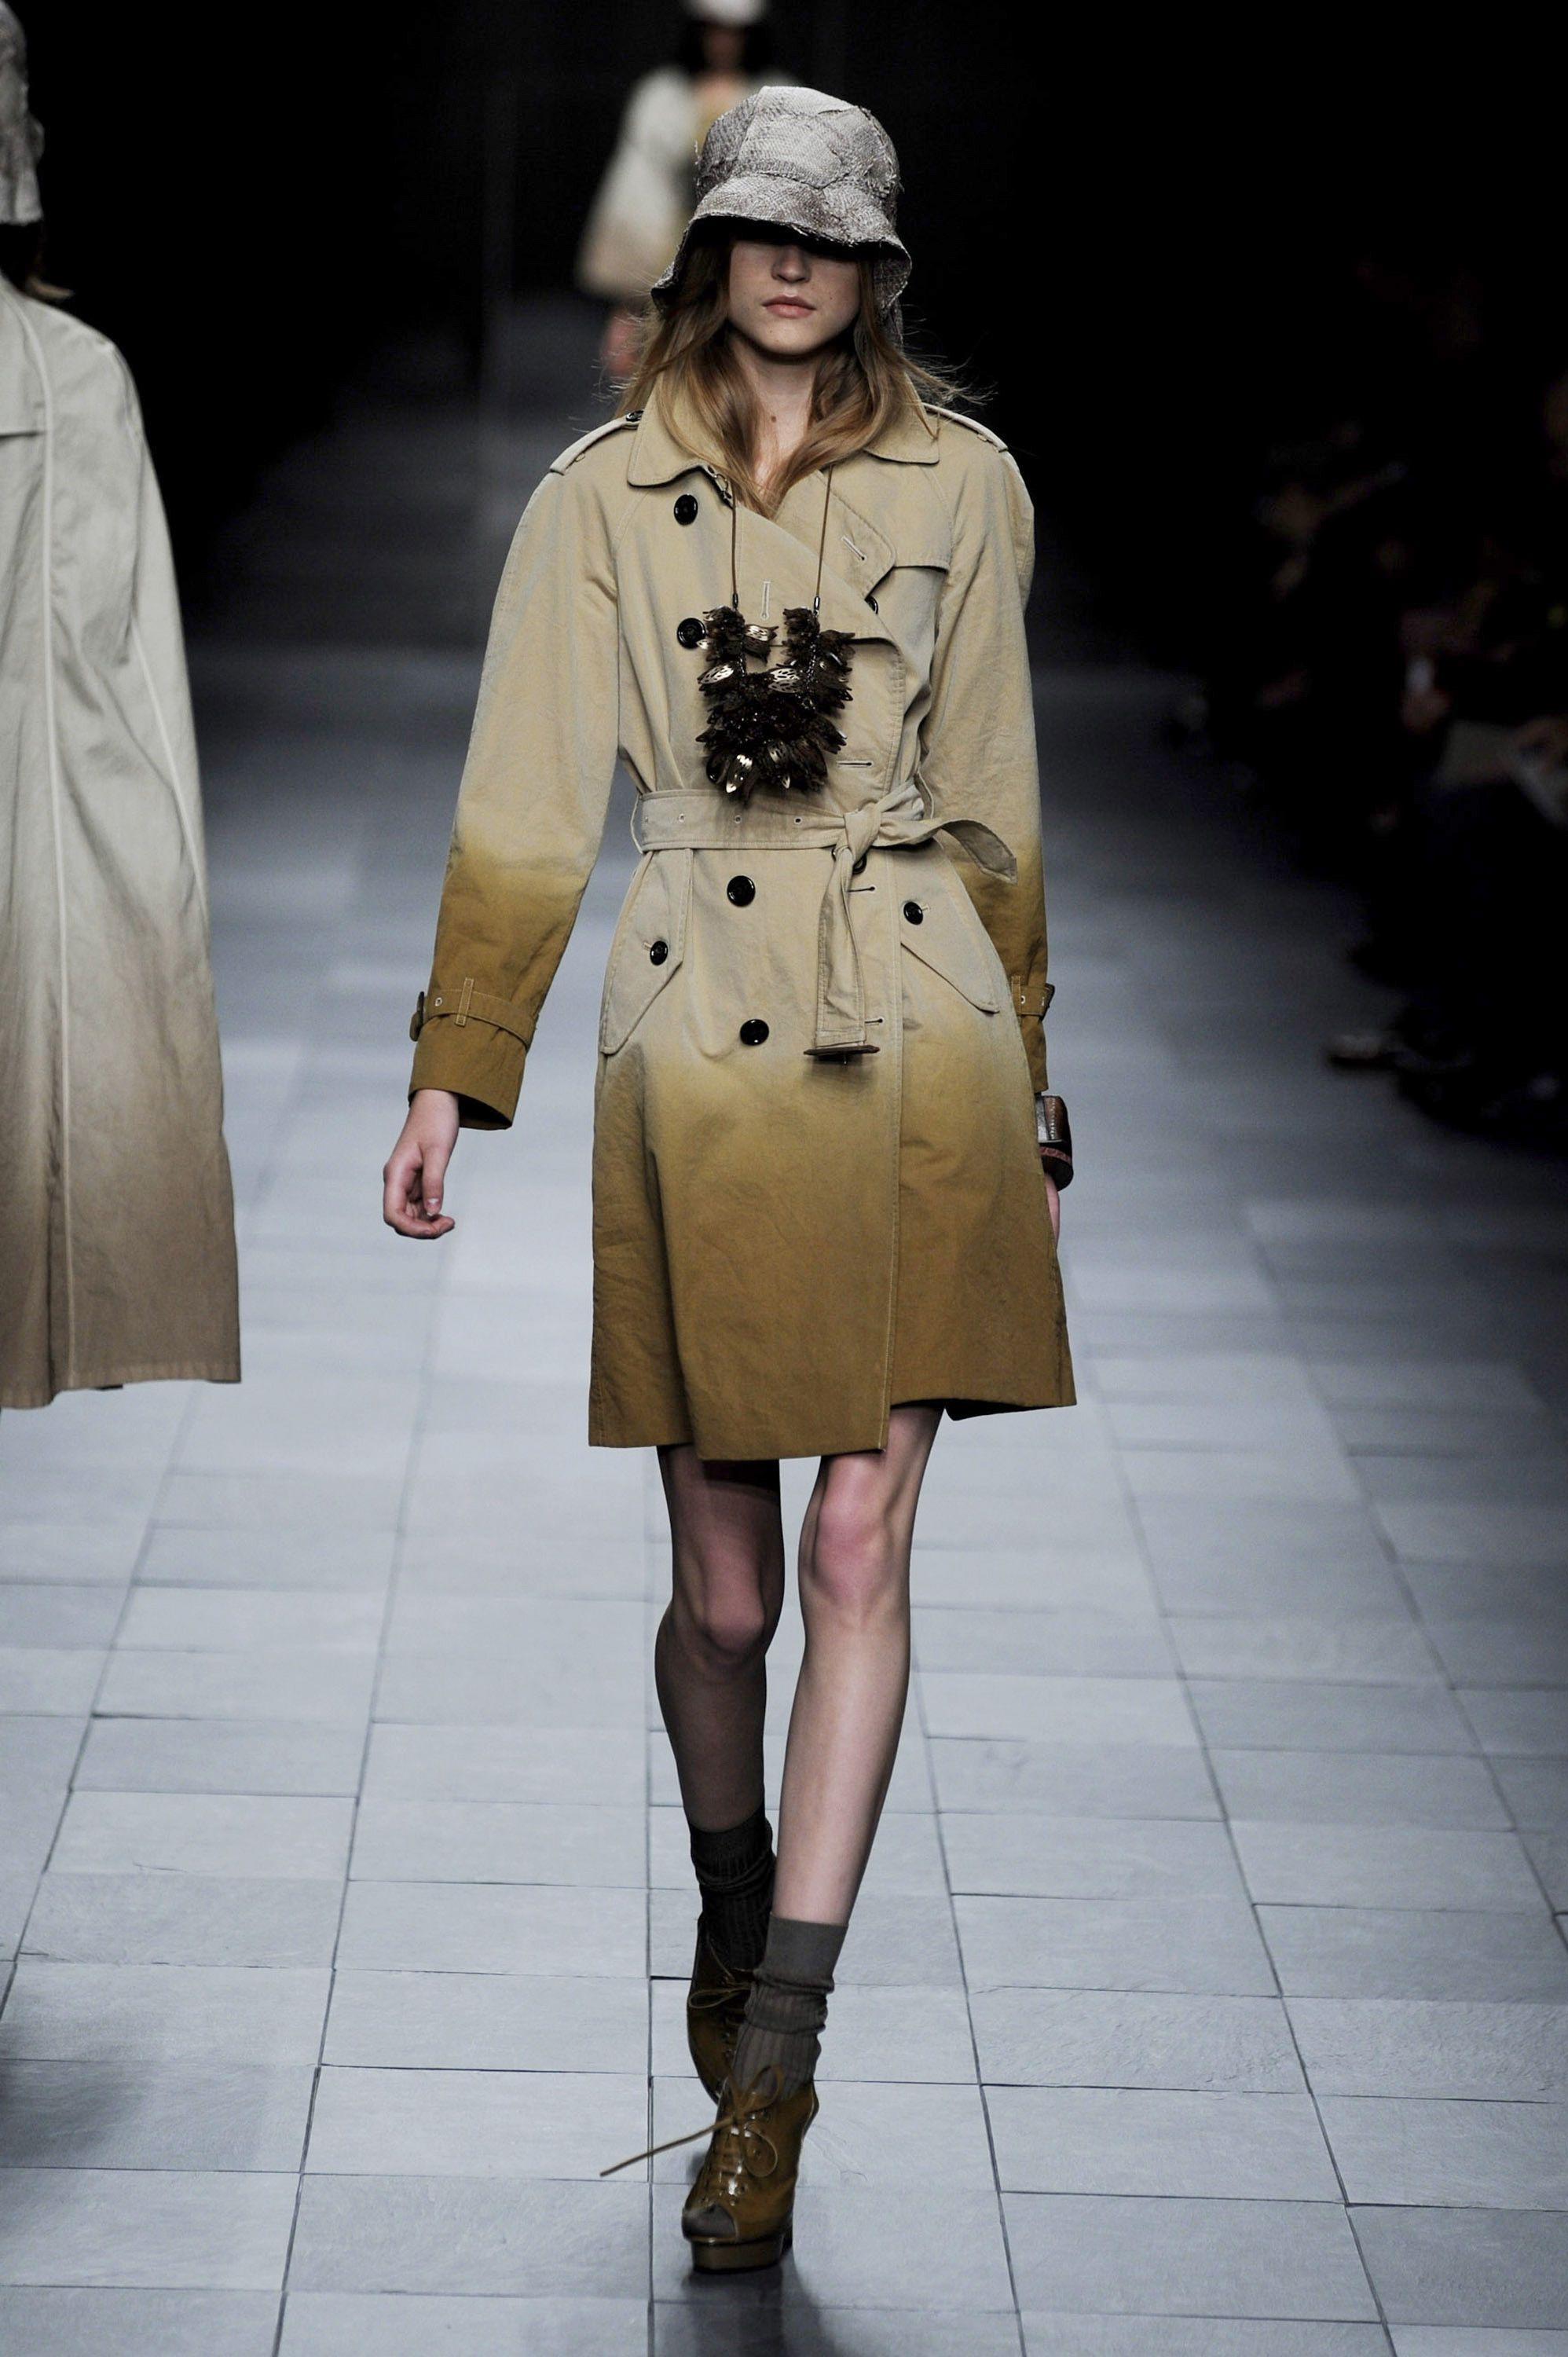 christopher bailey’s most iconic burberry trench coats